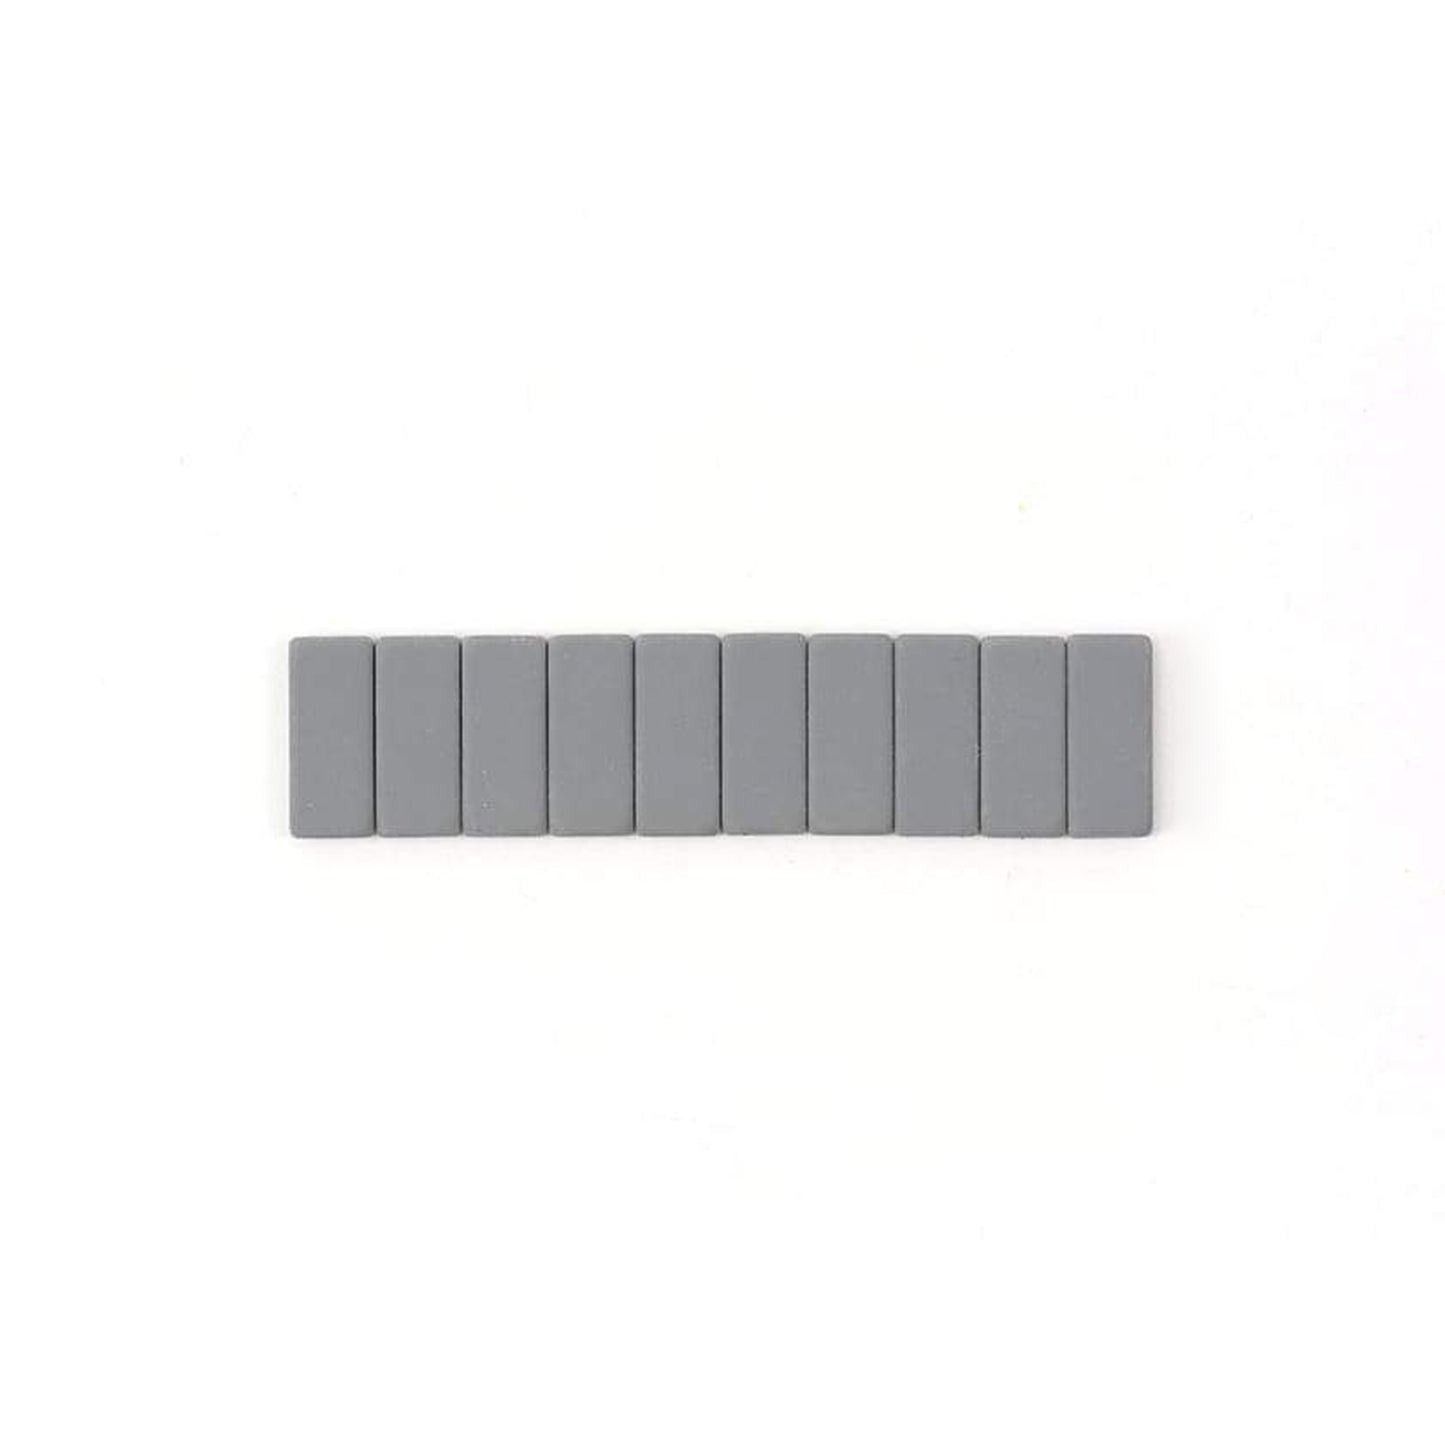 Blackwing Replacement Erasers - Grey by Blackwing - K. A. Artist Shop